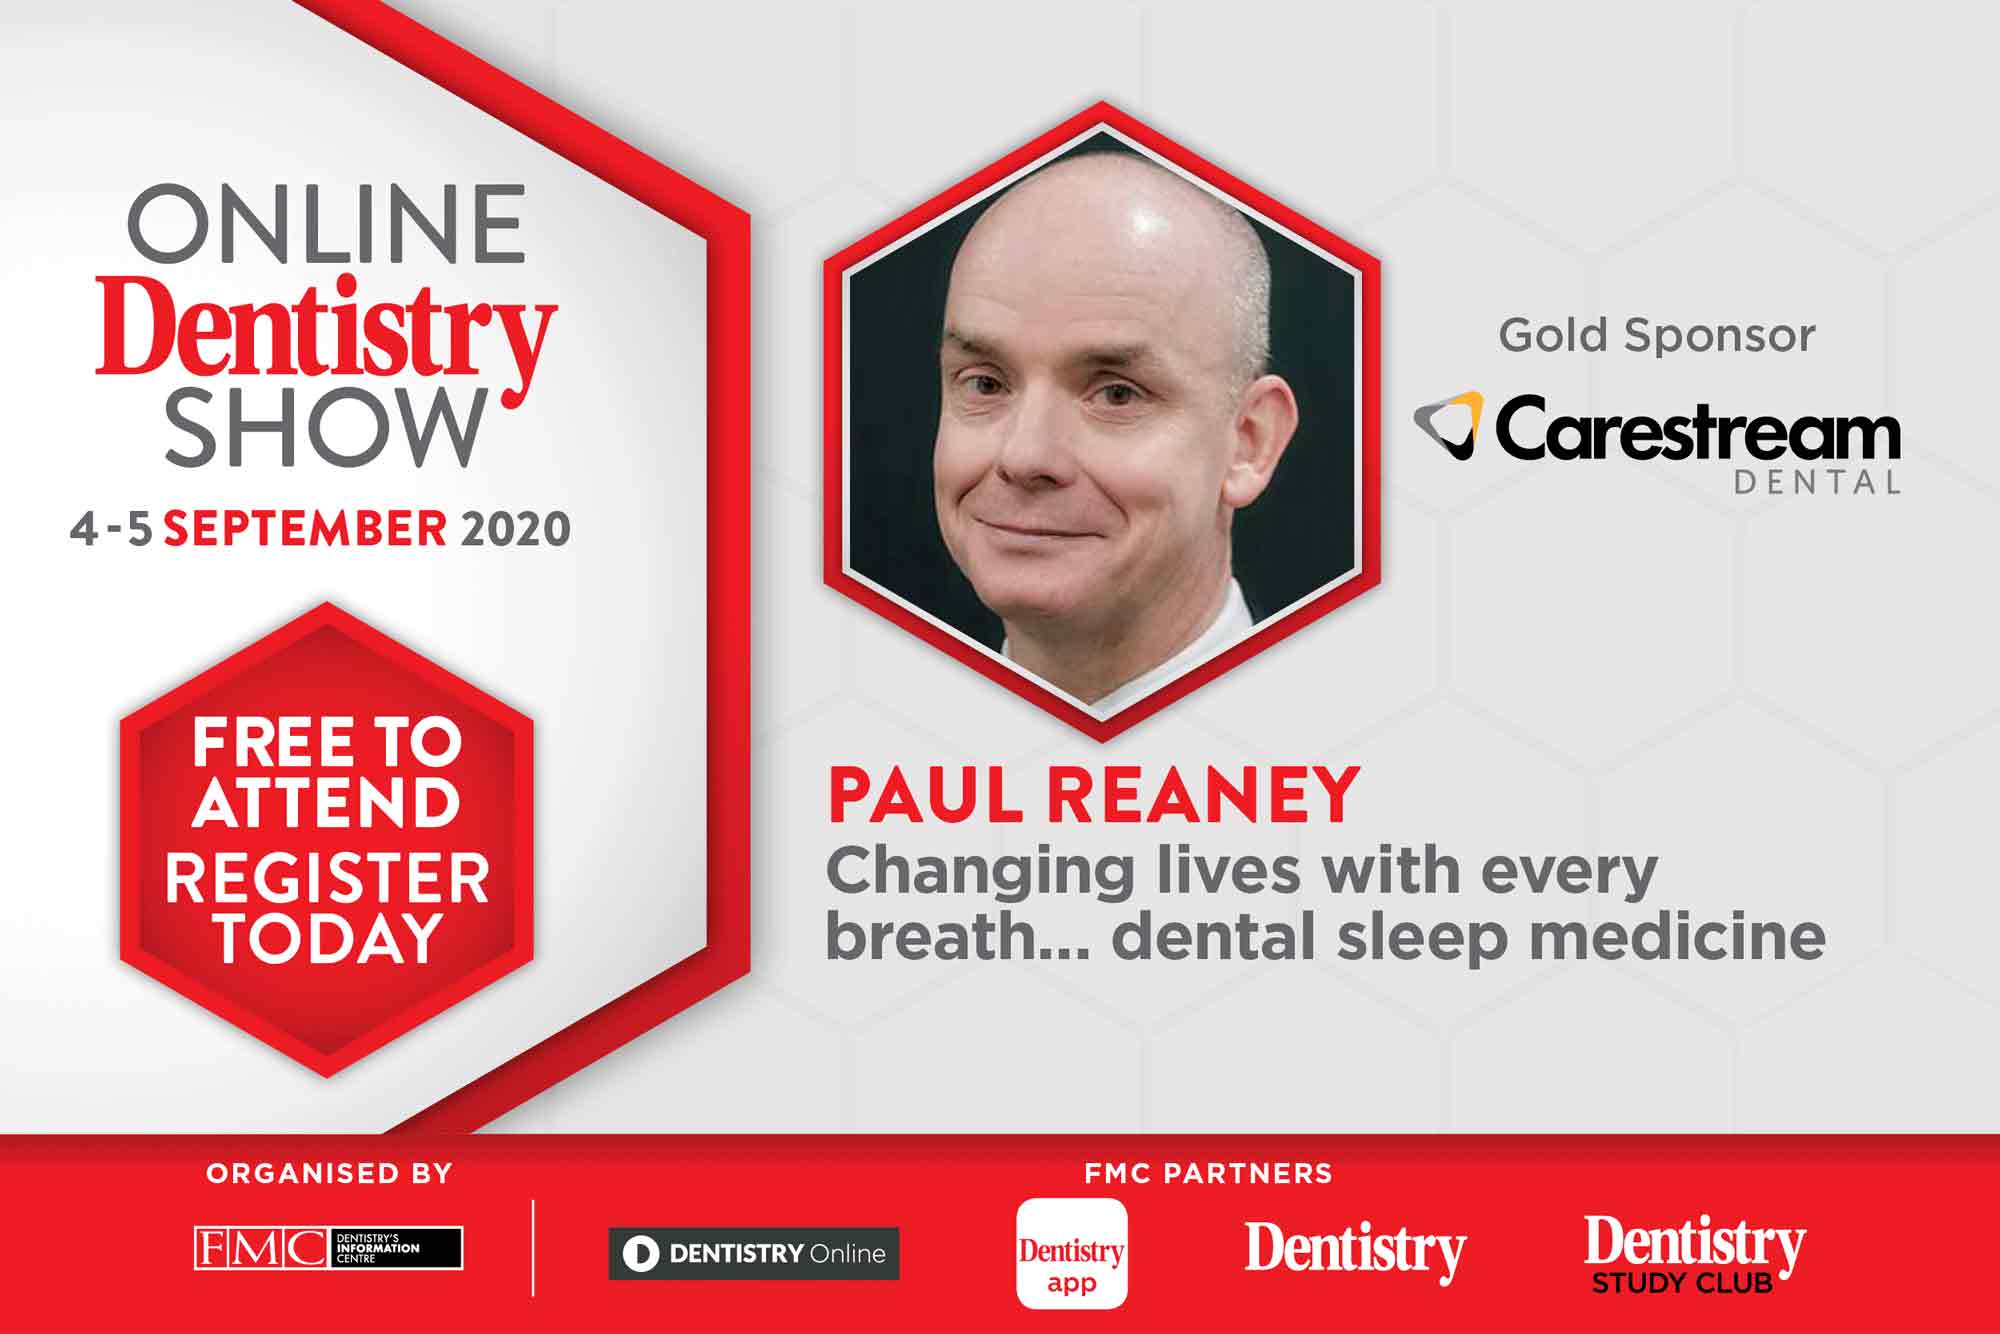 Coming this September, the Online Dentistry Show is putting on the very first virtual exhibition in UK dentistry with support from gold sponsors, Carestream